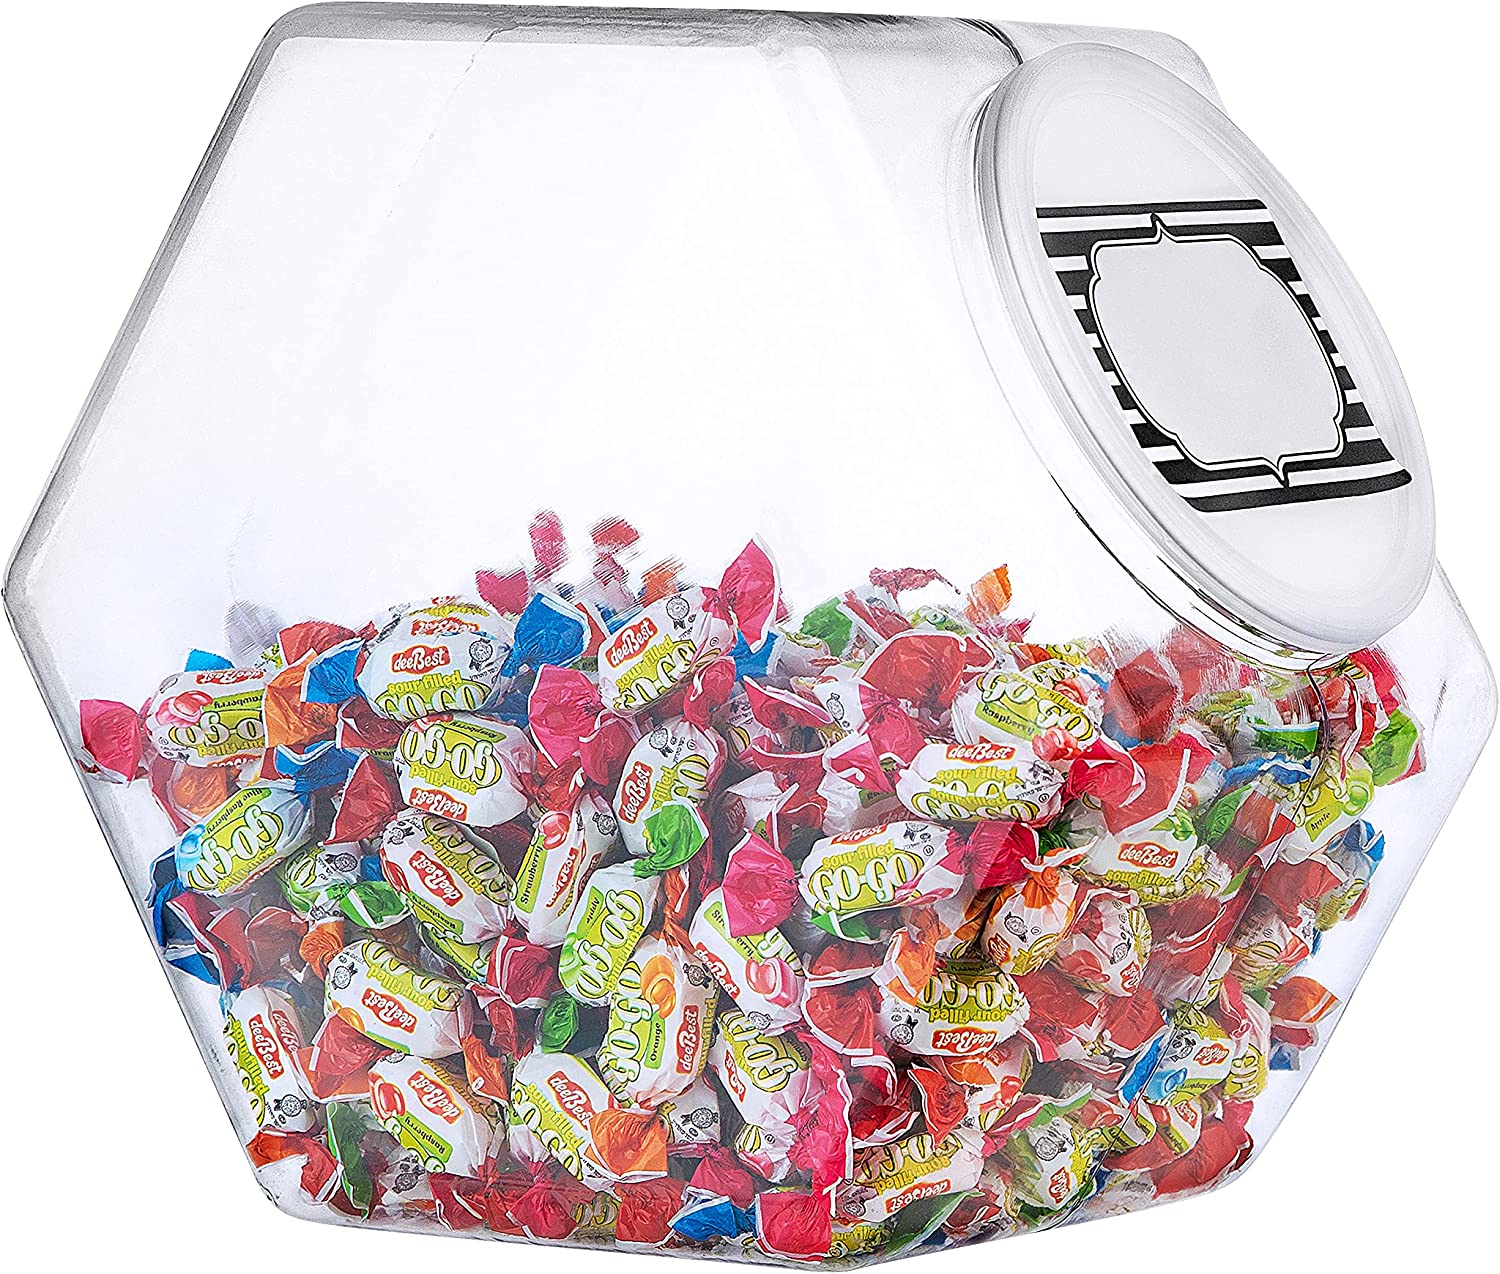 197-Ounce Plastic Jars with Lid (2 Count) - Wide Mouth Hexagon